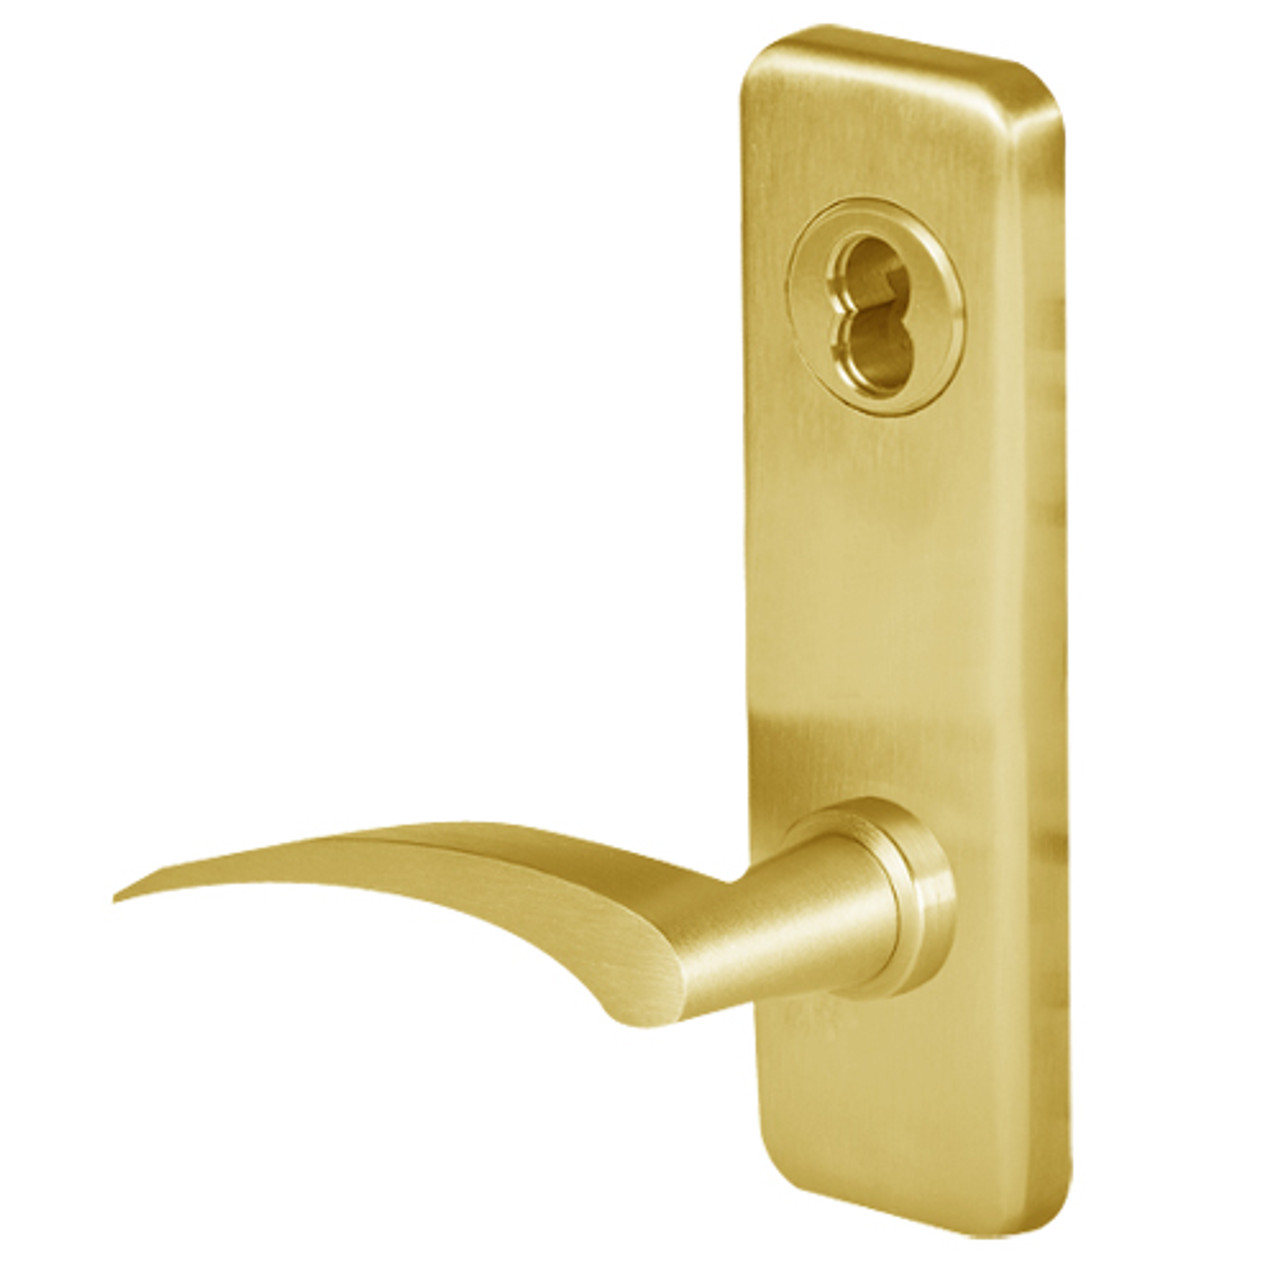 45H0LT17LJ605 Best 40H Series Privacy Heavy Duty Mortise Lever Lock with Gull Wing LH in Bright Brass